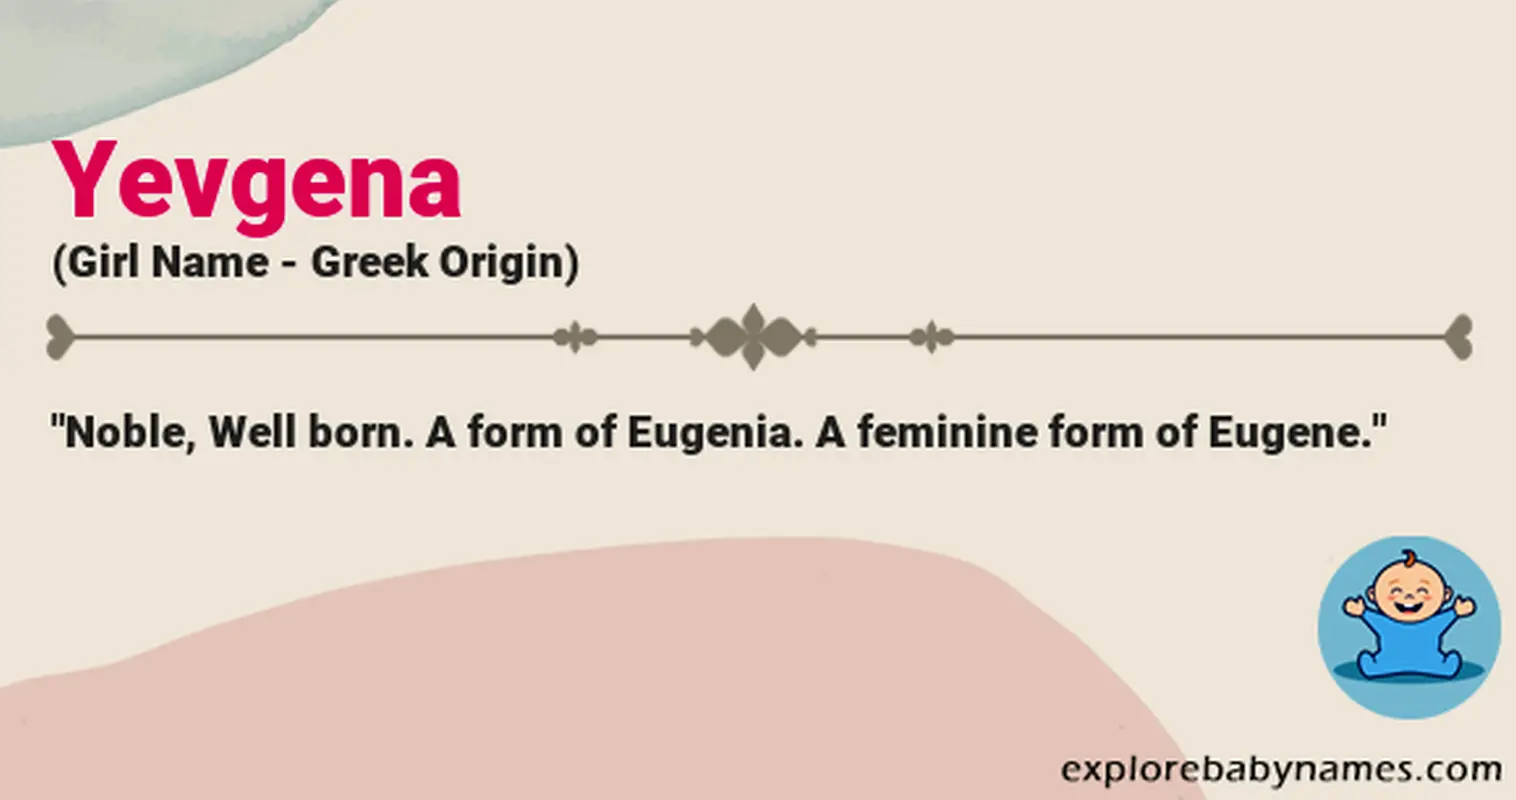 Meaning of Yevgena